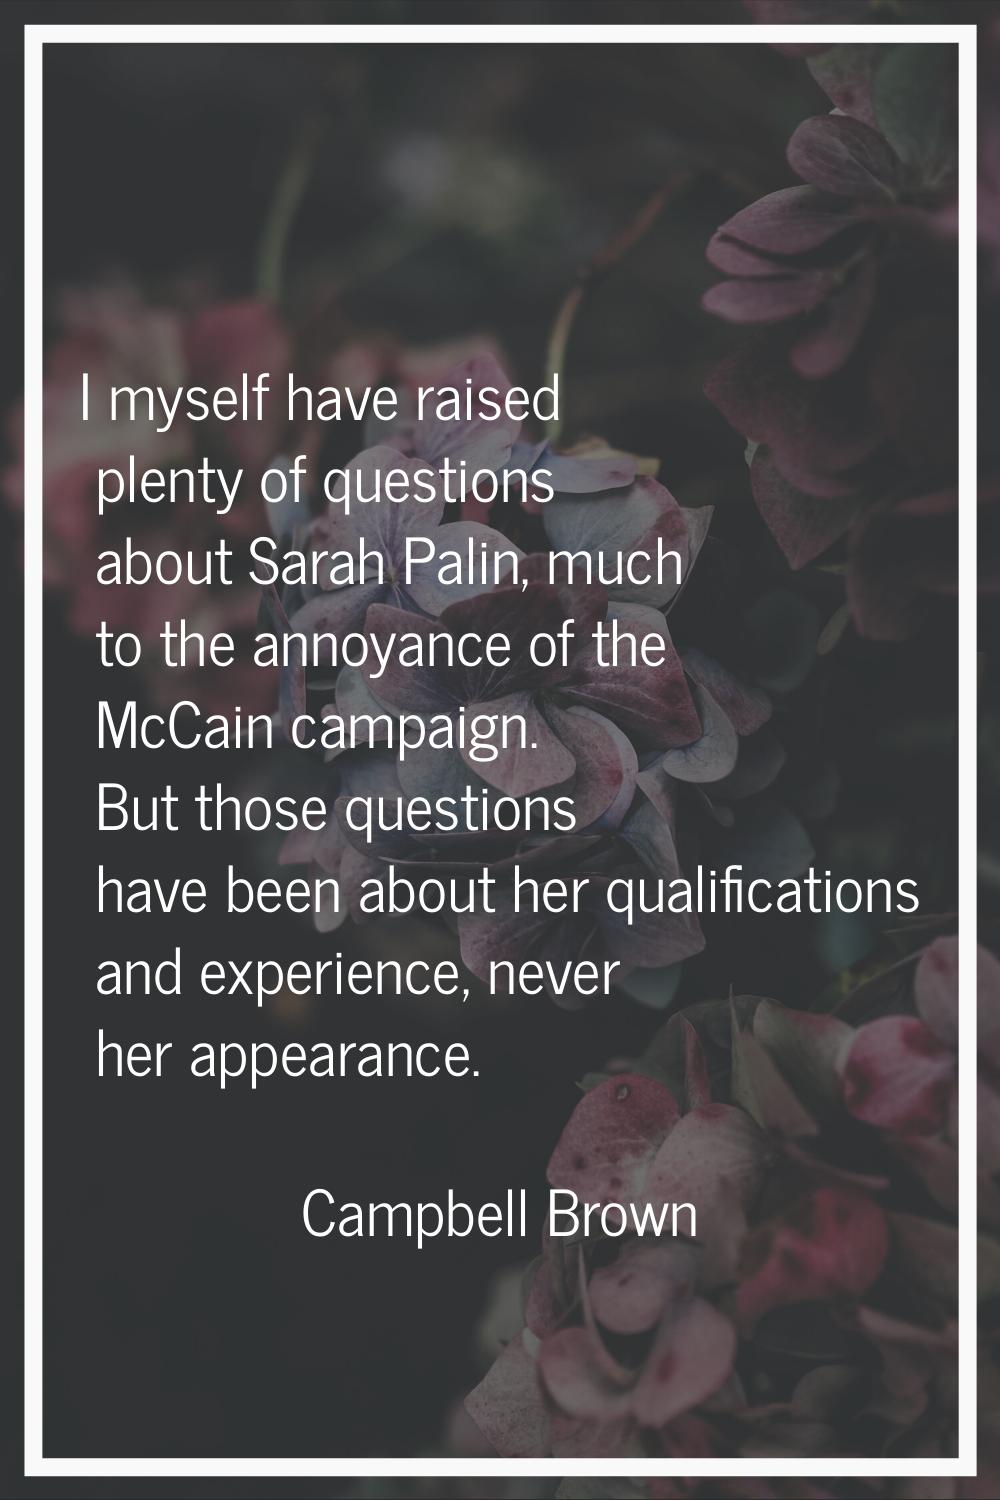 I myself have raised plenty of questions about Sarah Palin, much to the annoyance of the McCain cam